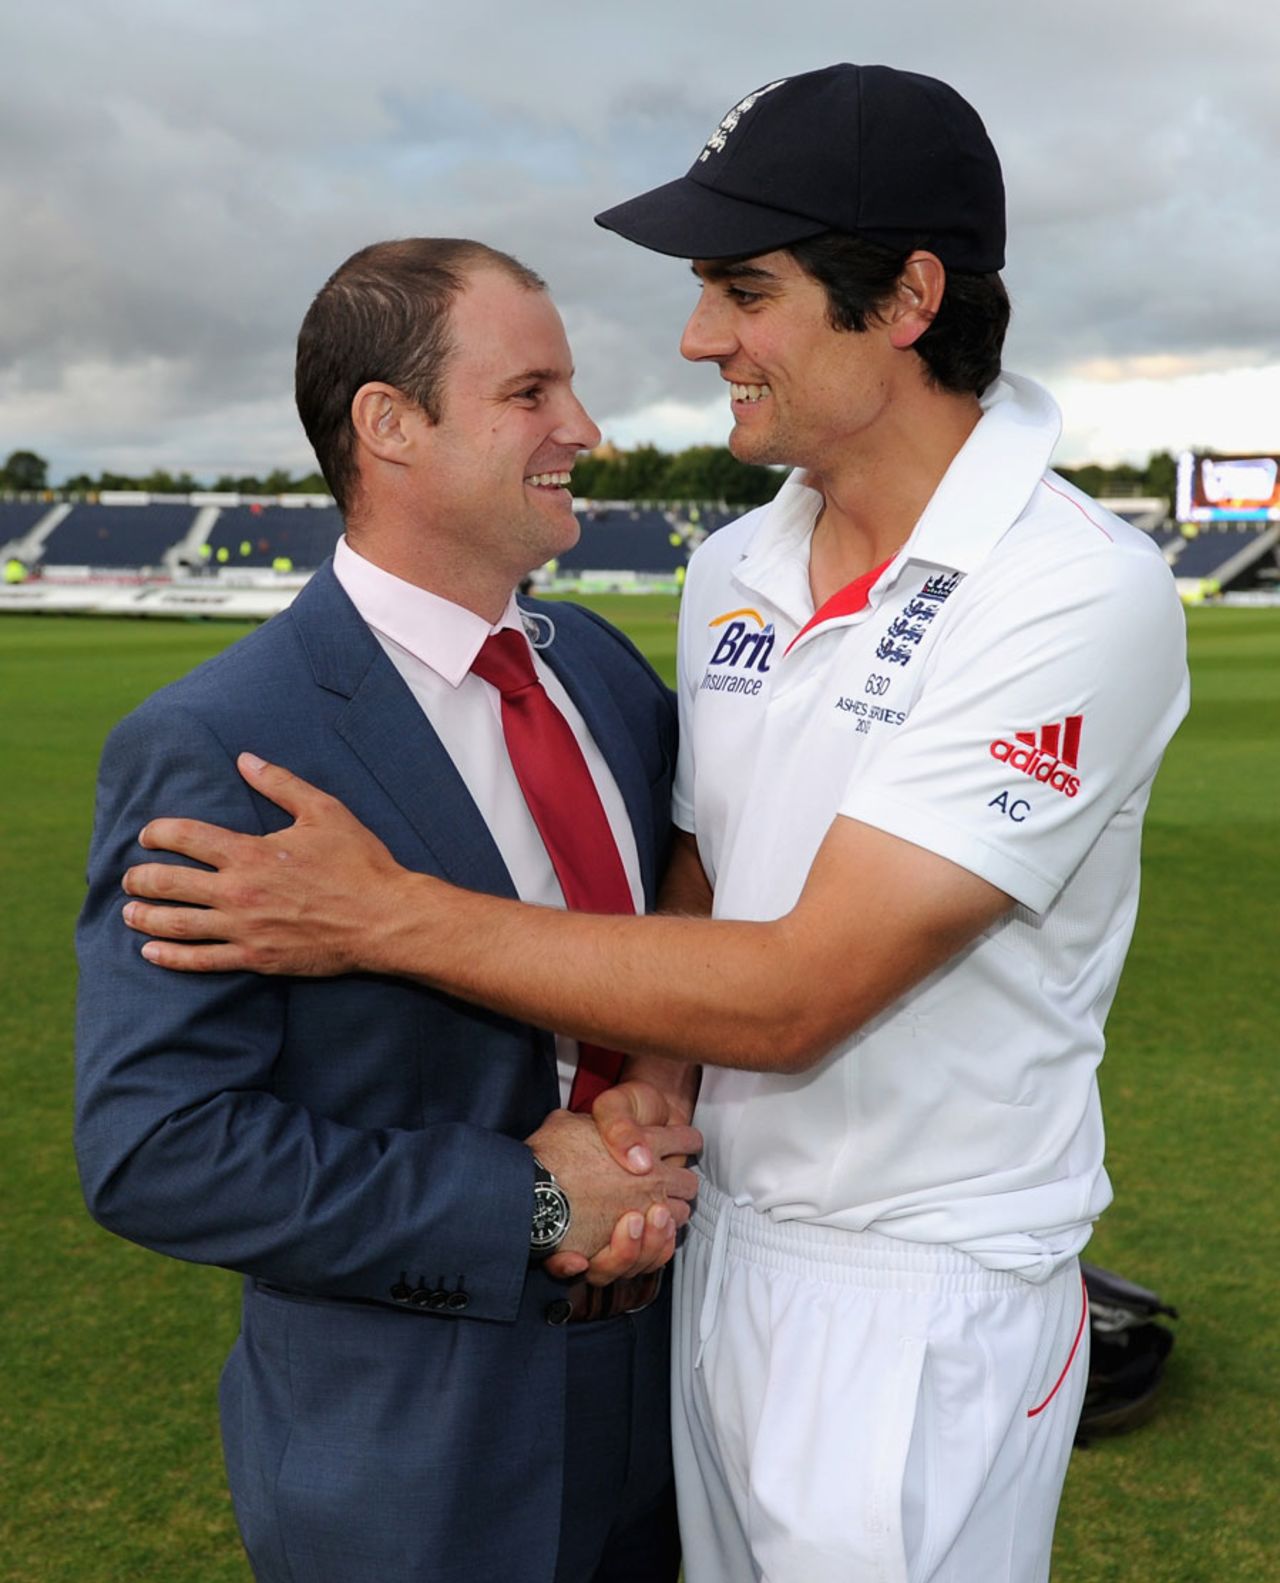 Alastair Cook gets a handshake from Andrew Strauss, England v Australia, 4th Investec Test, 4th day, Chester-le-Street, August 12, 2013